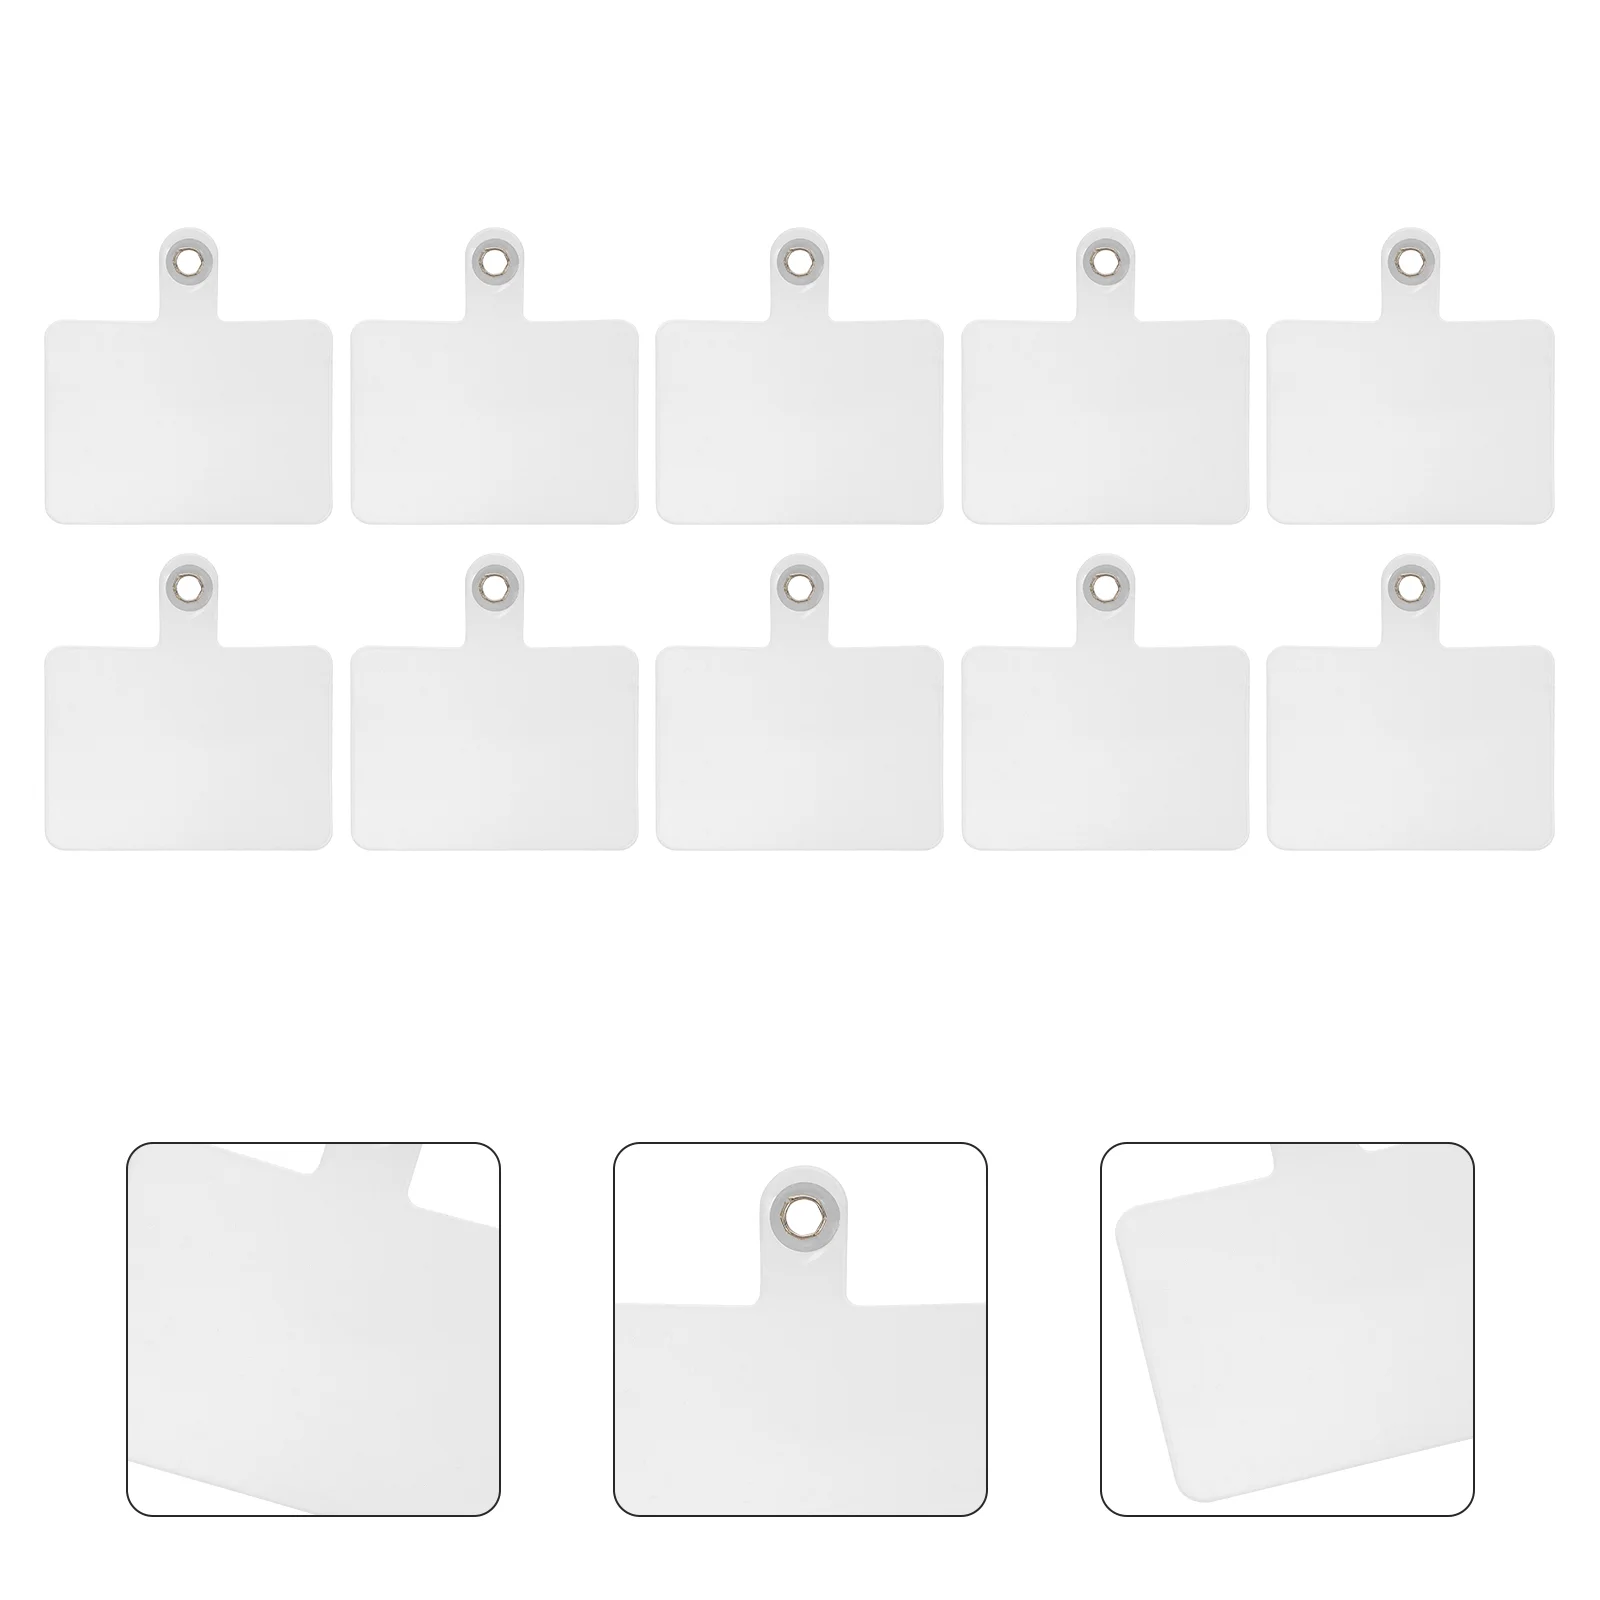 

10 Pcs Card Gasket Tether Tabs Smart Labels Hook Pvc Accessory Adhesive-free Patches Case Anchor Miss Phones